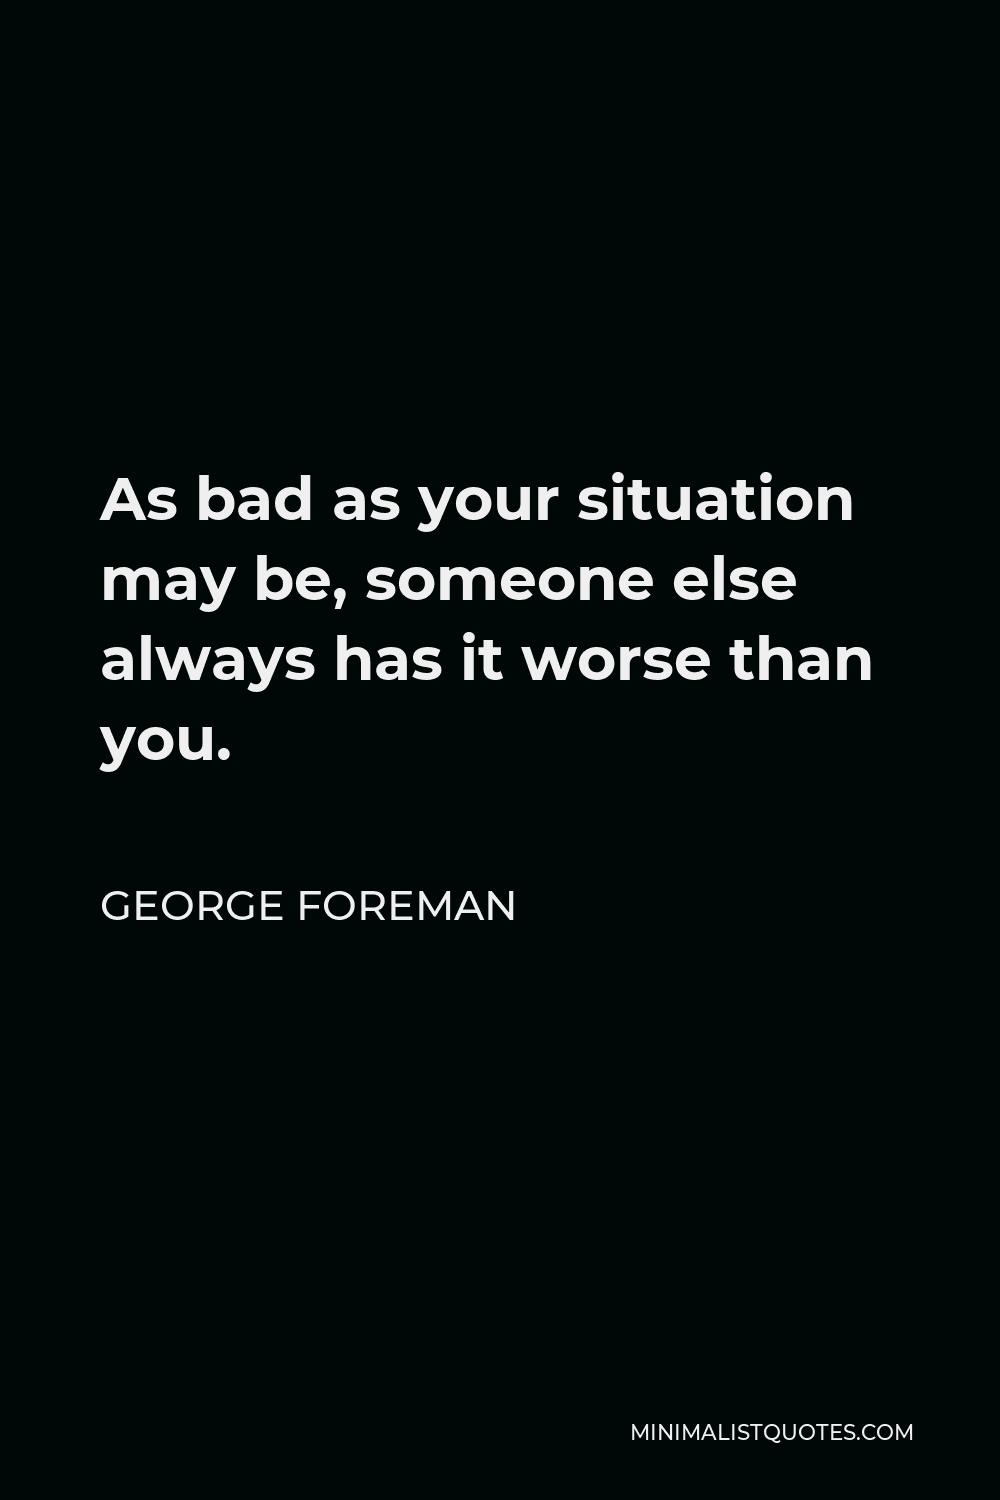 George Foreman Quote - As bad as your situation may be, someone else always has it worse than you.